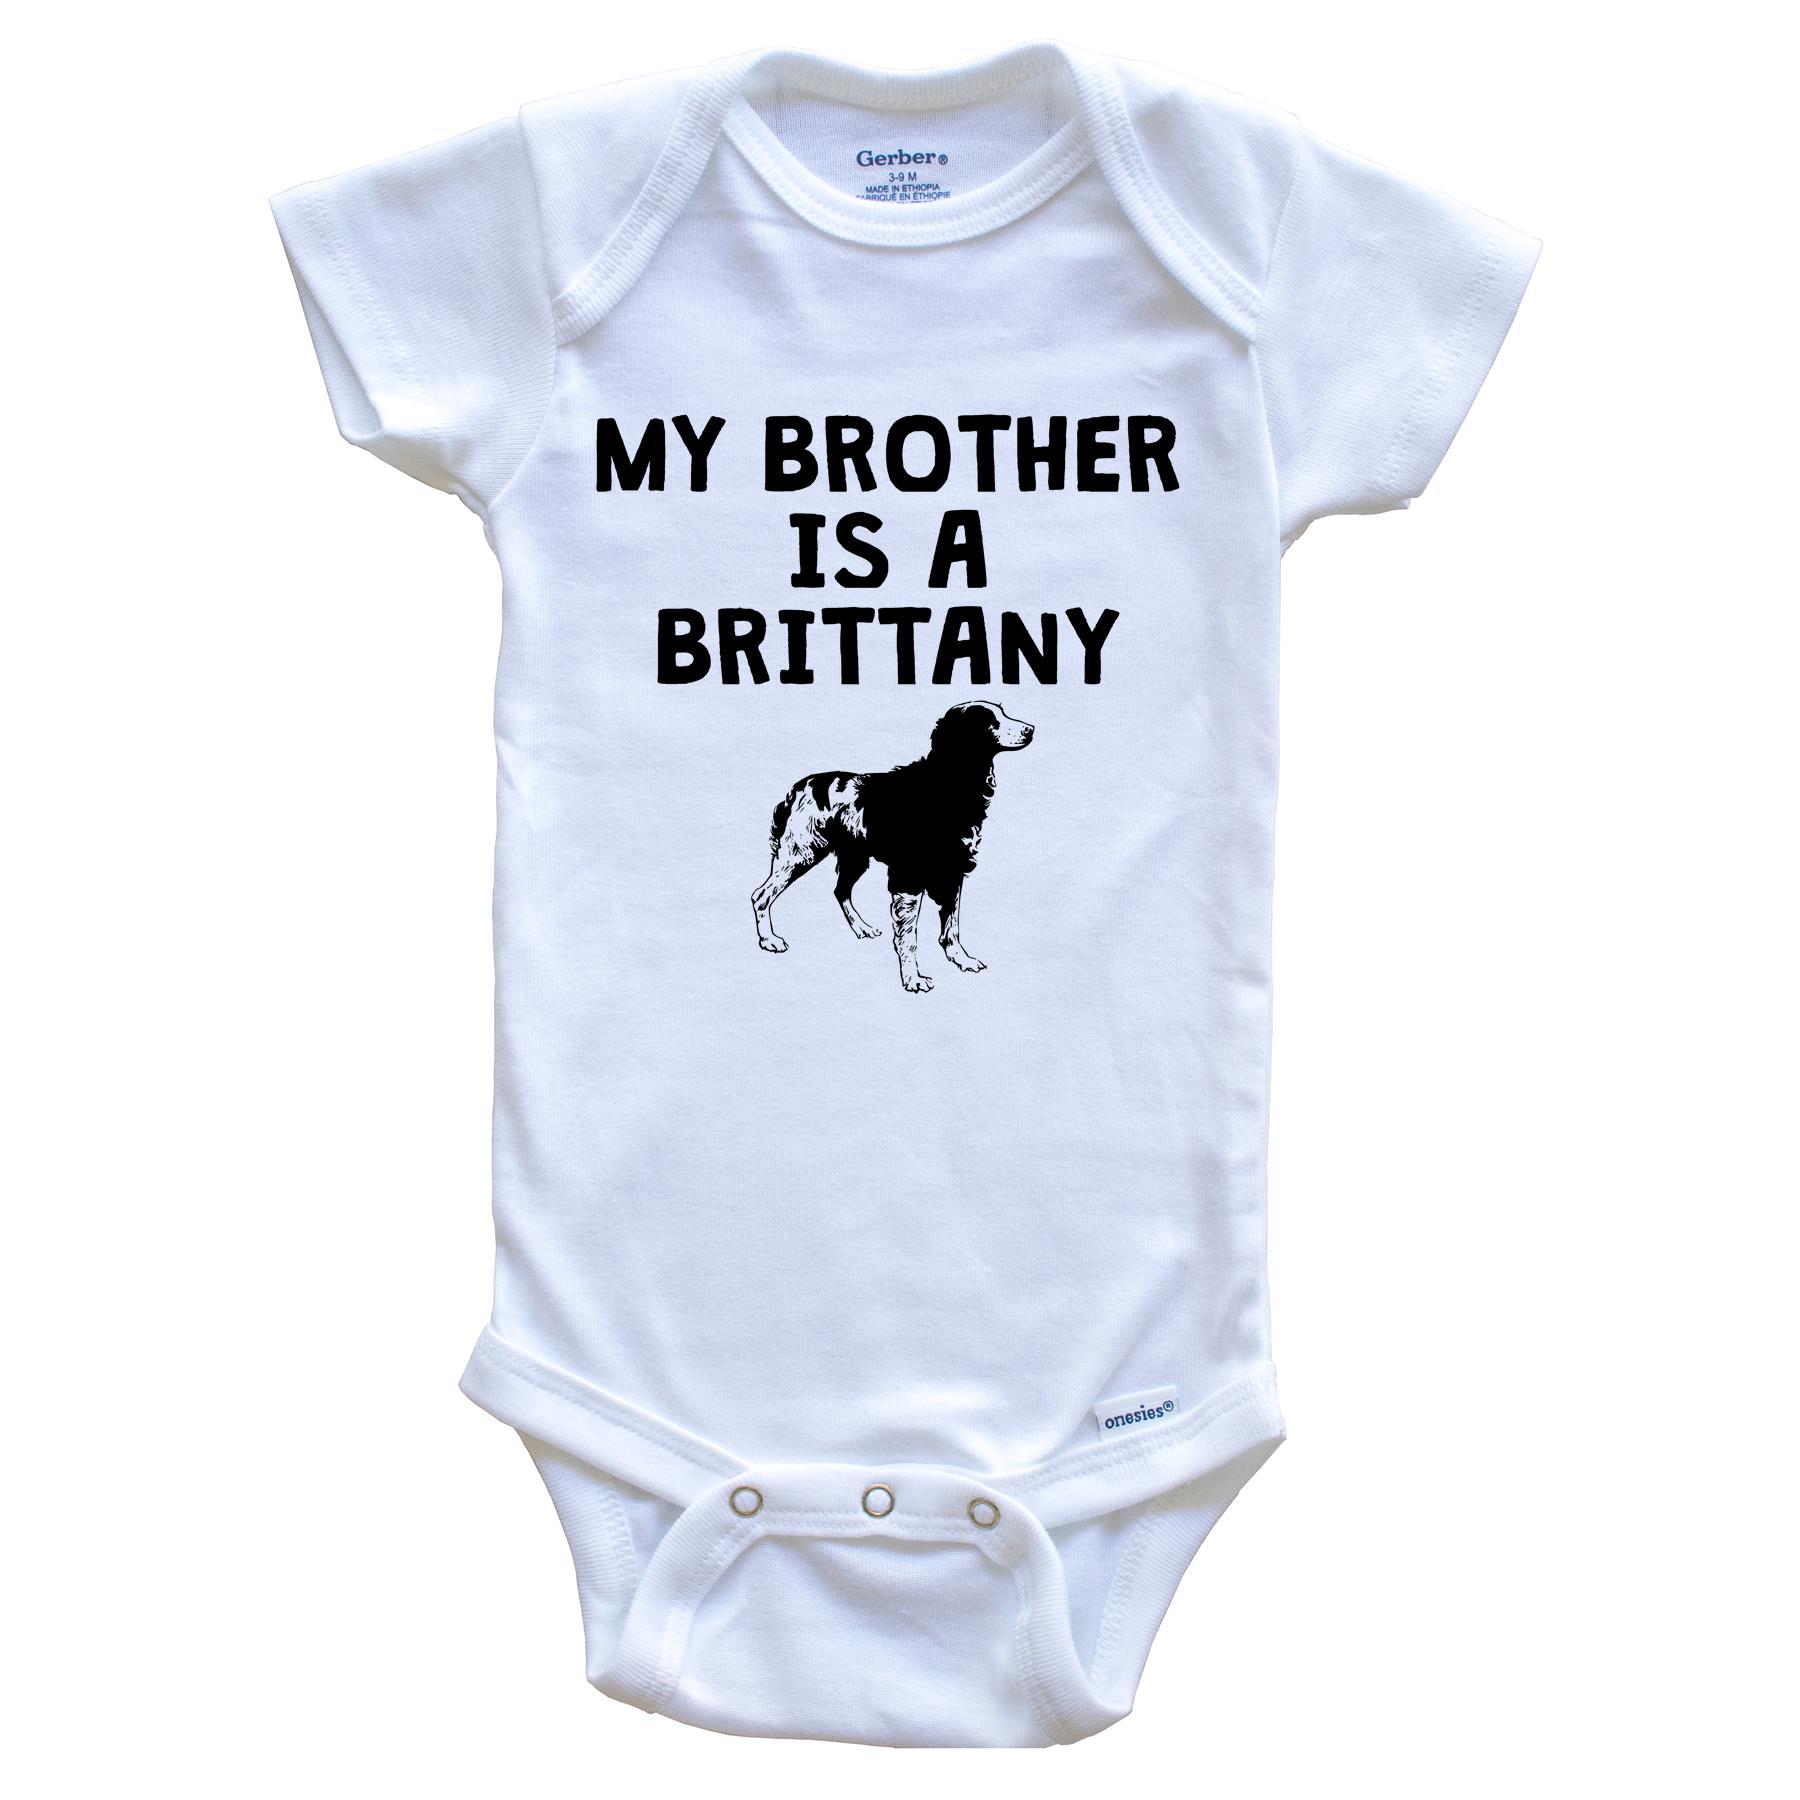 My Brother Is A Brittany Baby Onesie